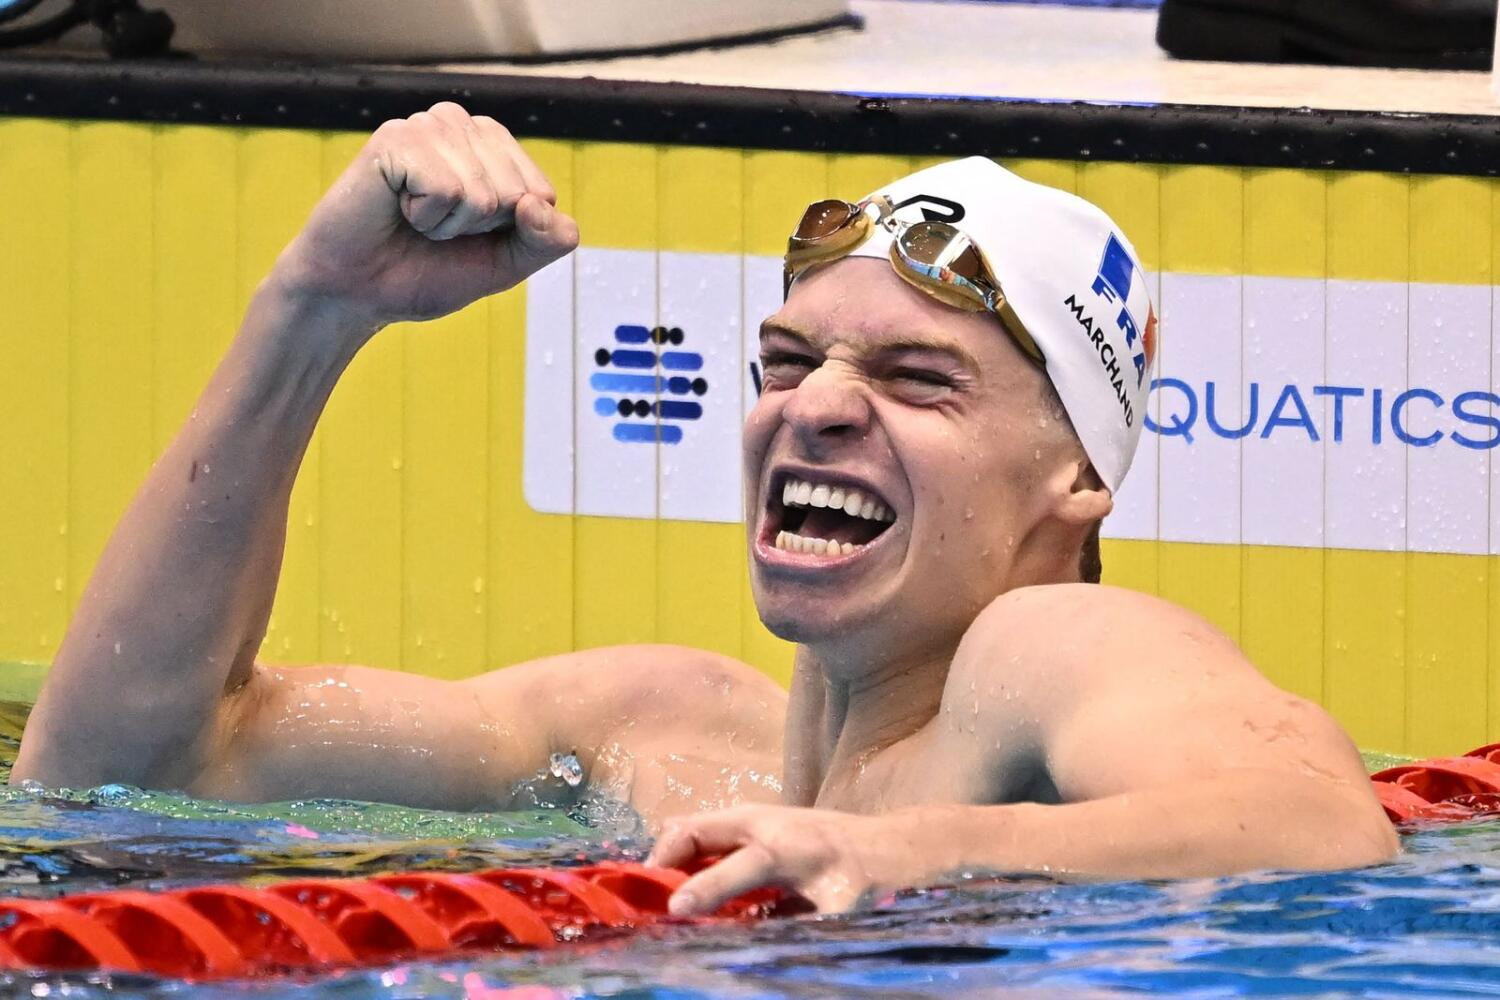 leon marchand was irresistible in fukuoka japan he won three gold medals and breaking michael phelps long standing 400m individual medley world record photo afp